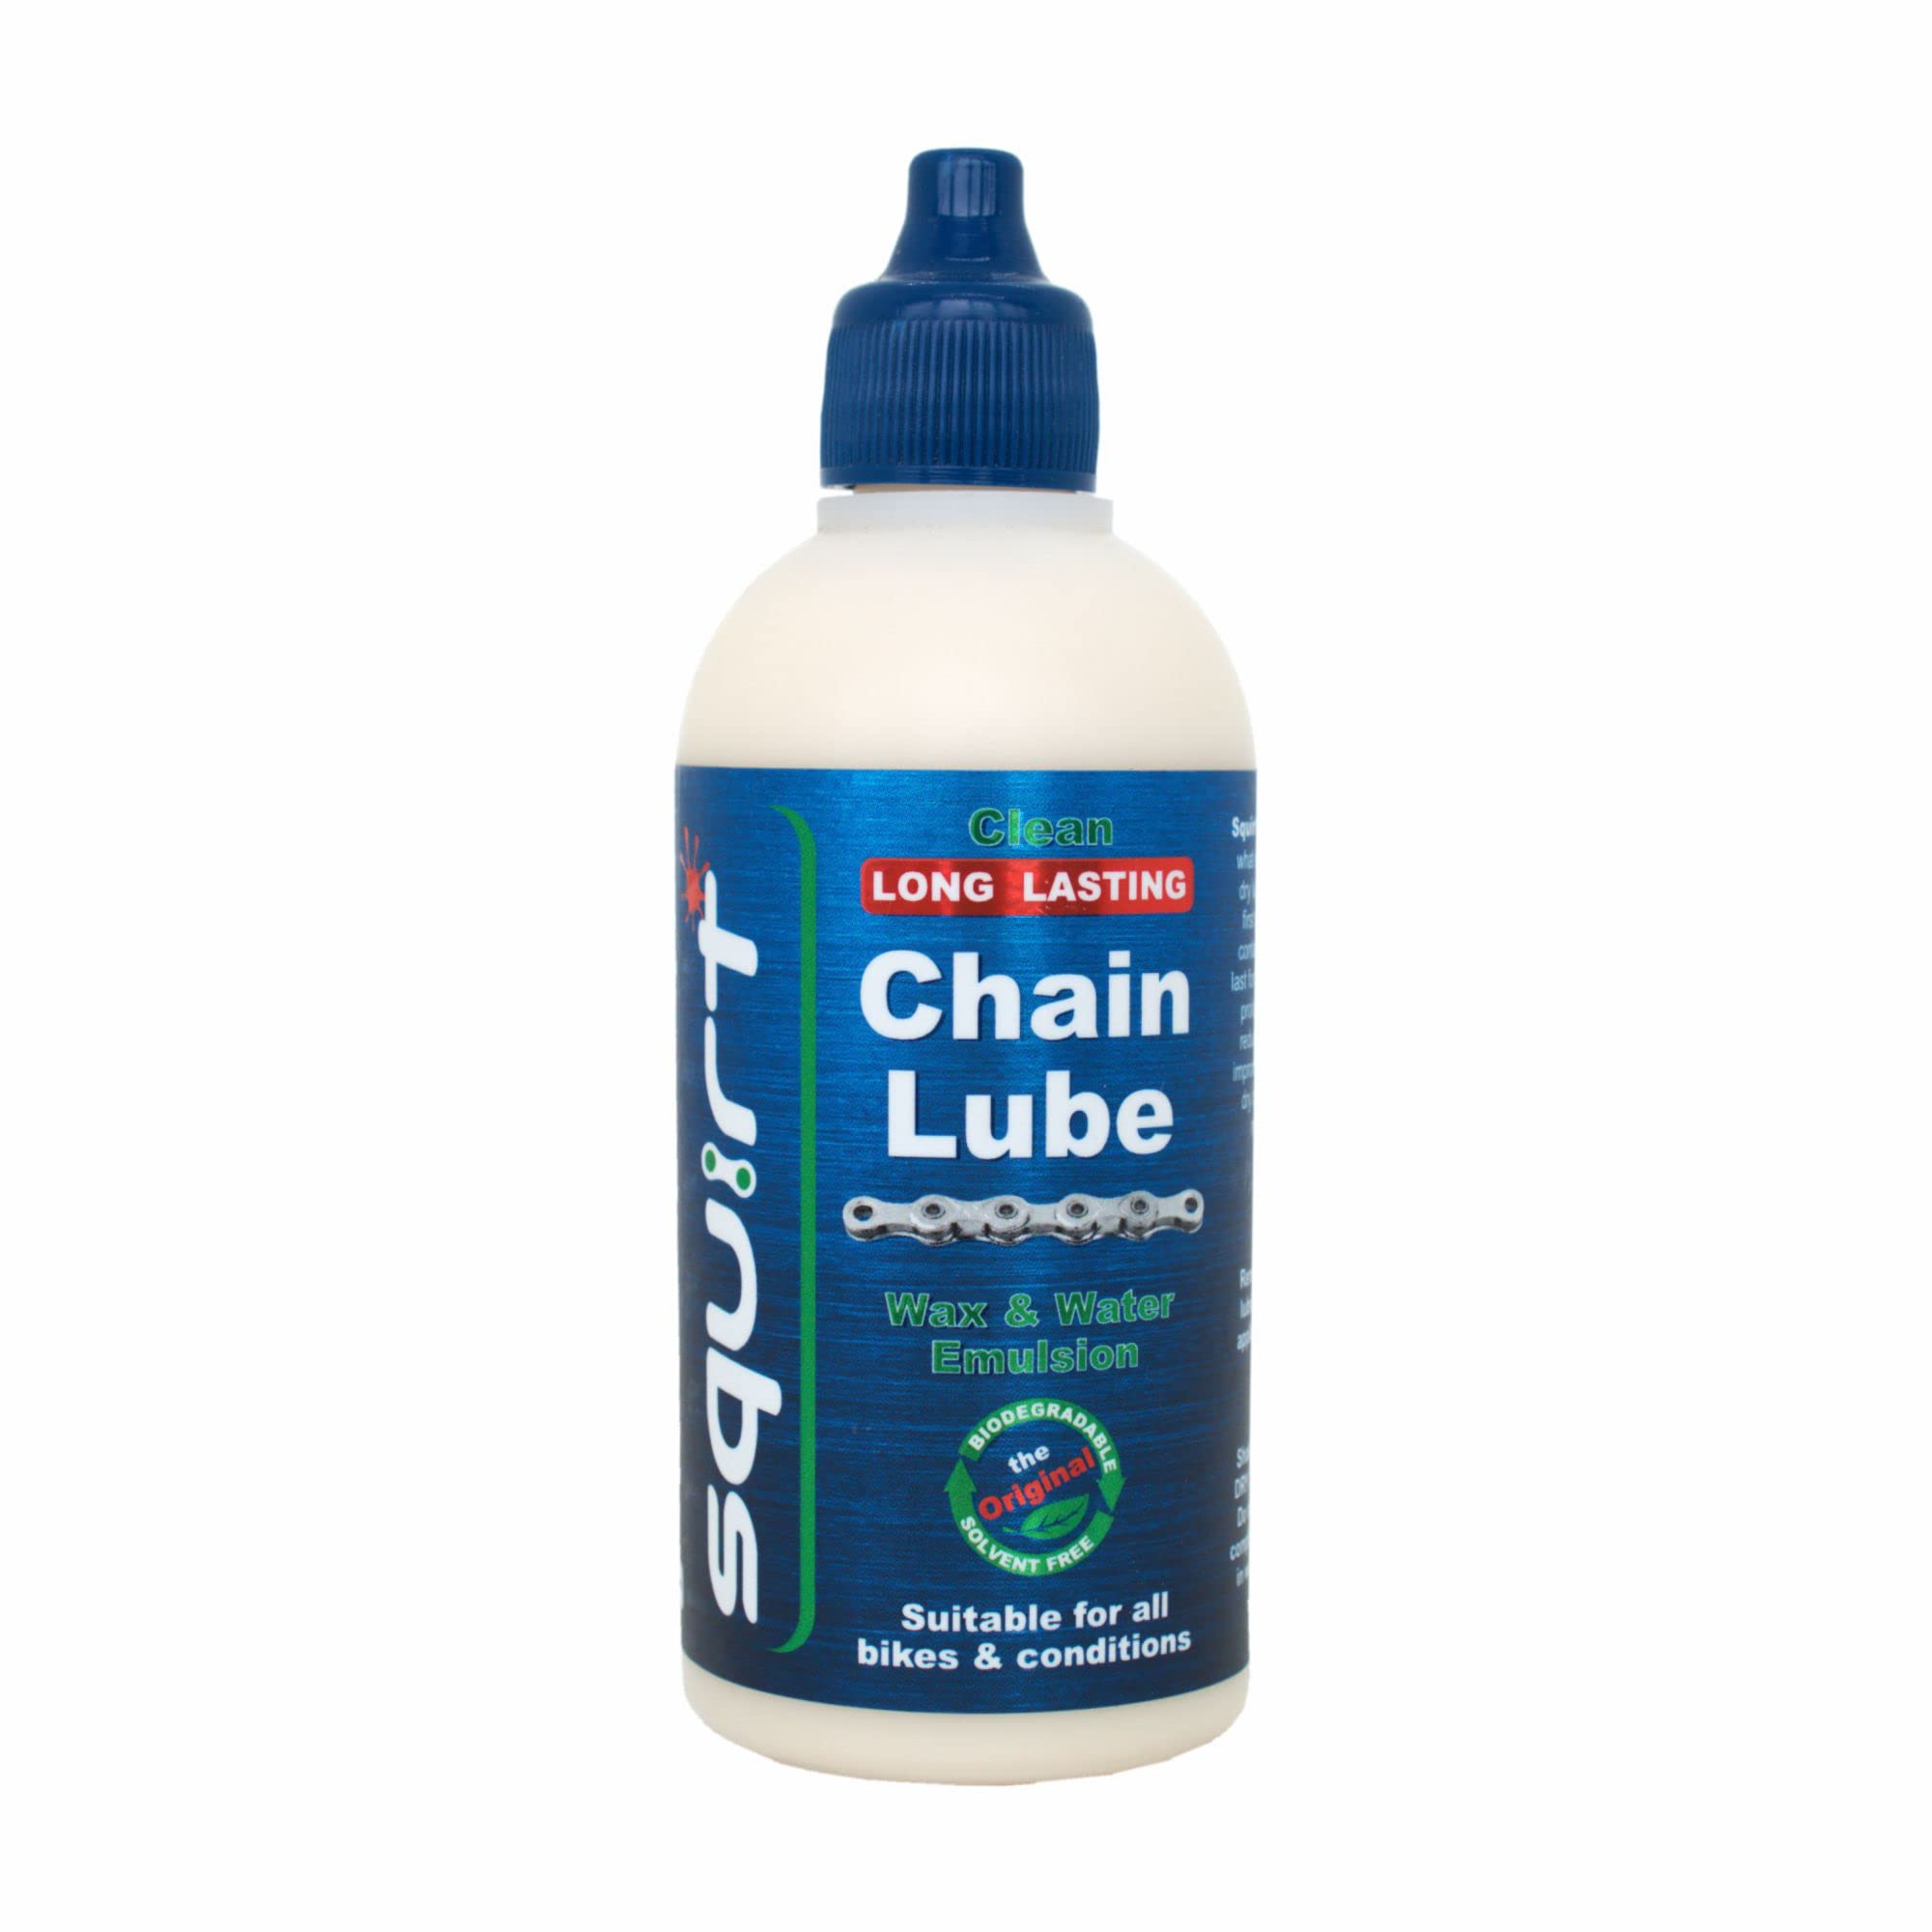 Squirt Chain Lube For Bikes Oz Long Lasting Lube For All Bike Chains All Weather Dry Chain